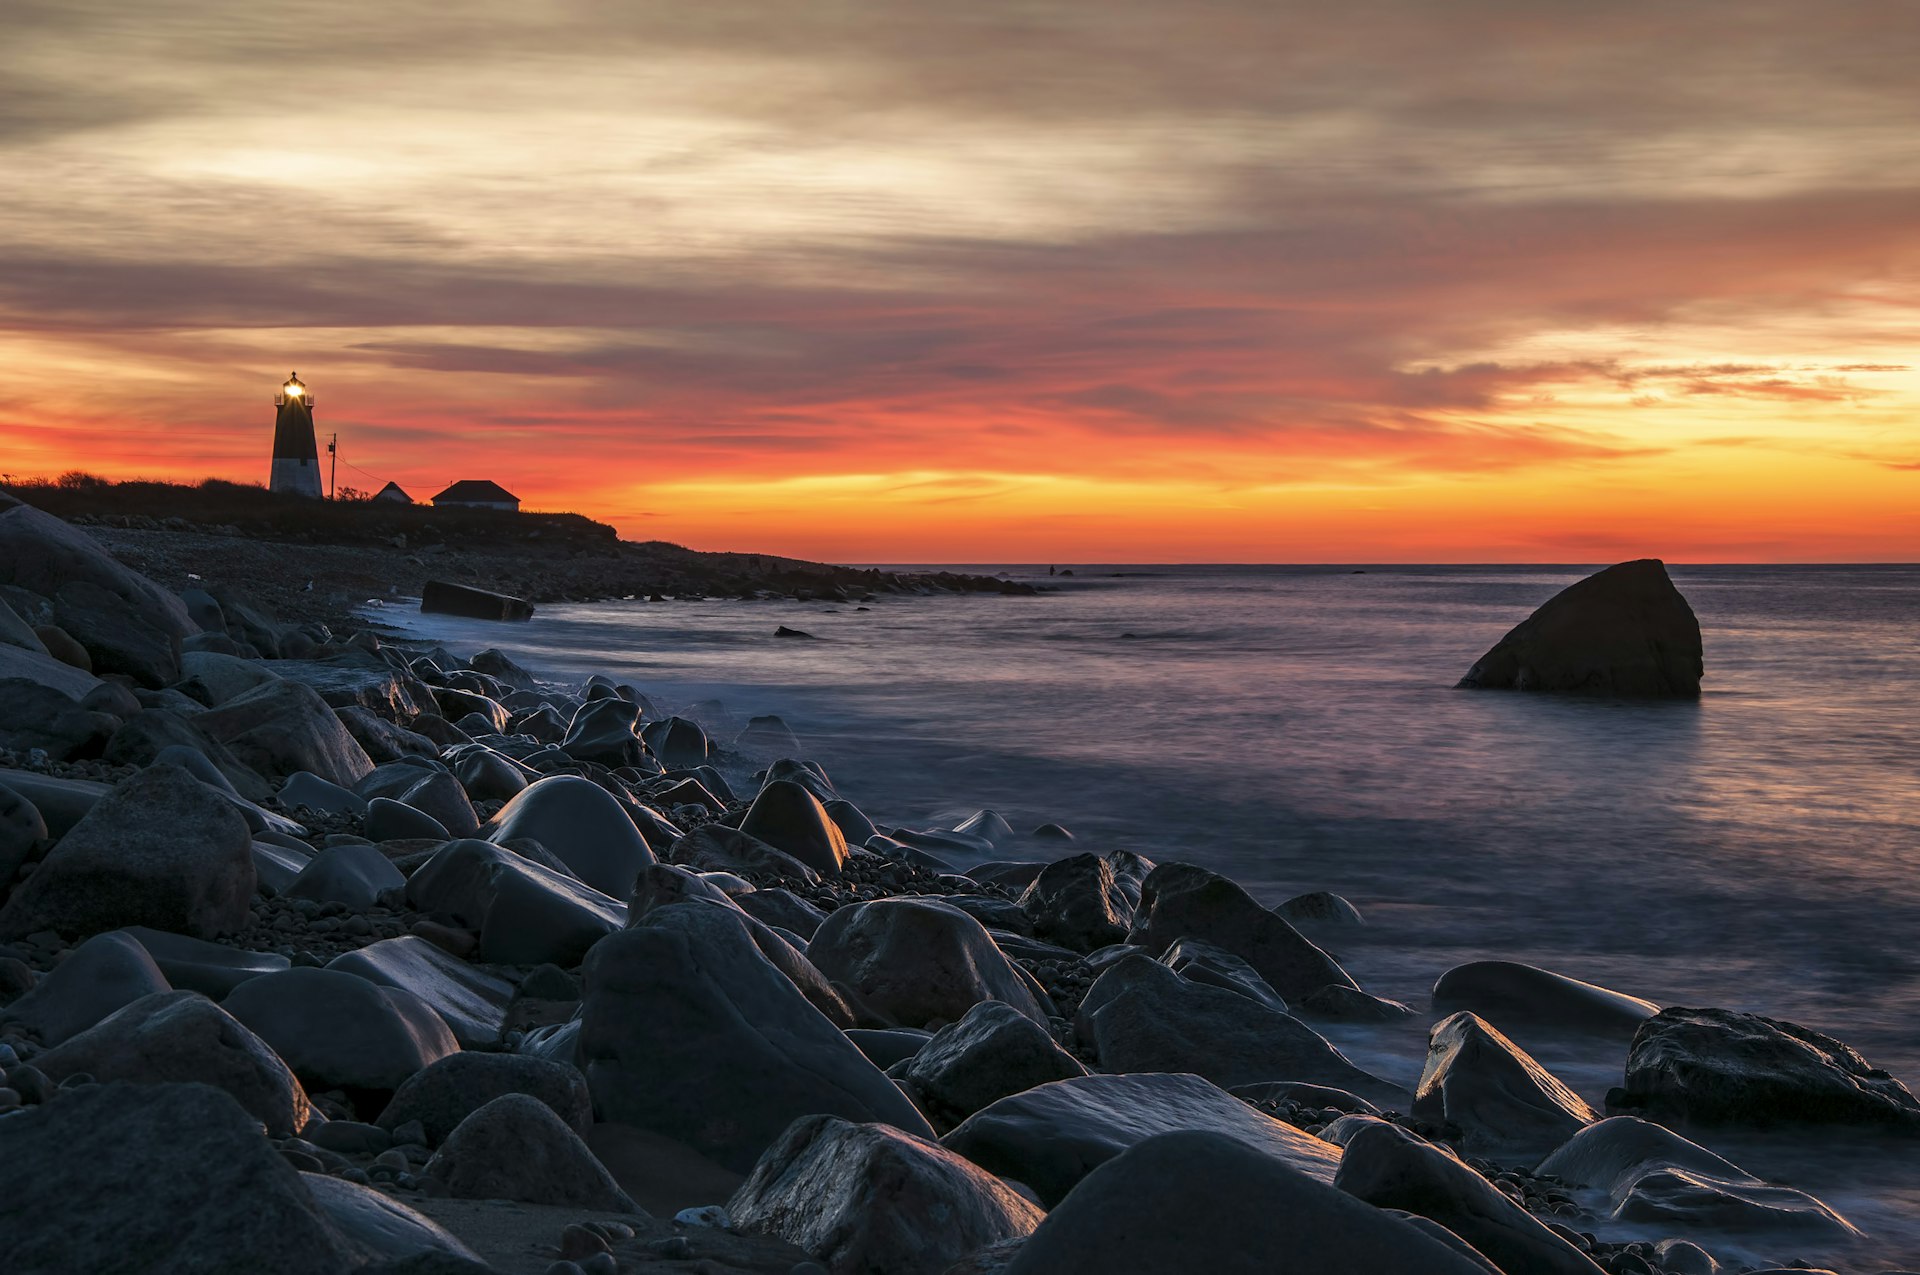 A sunrise shot on a rocky coastline, with the sky streaked with oranges and yellows. A lighthouse, to the left of the image, is silhouetted